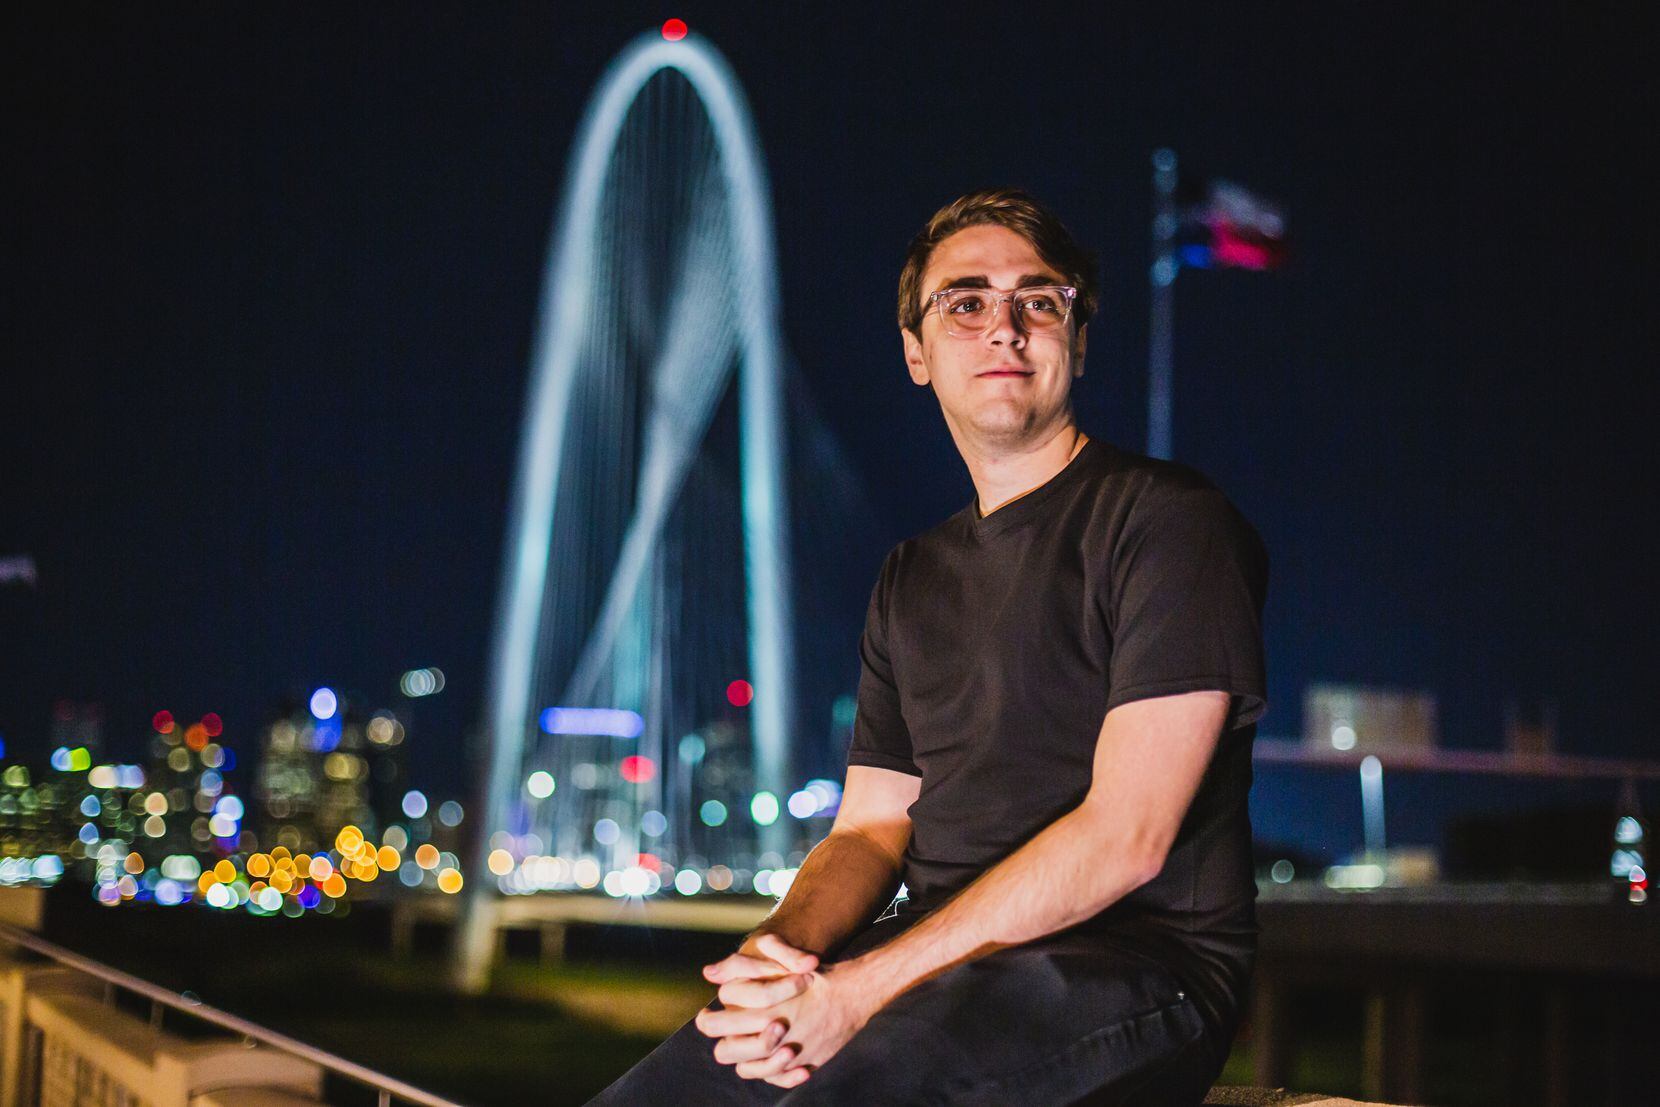 Dallas Call of Duty League player James "Clayster" Eubanks.